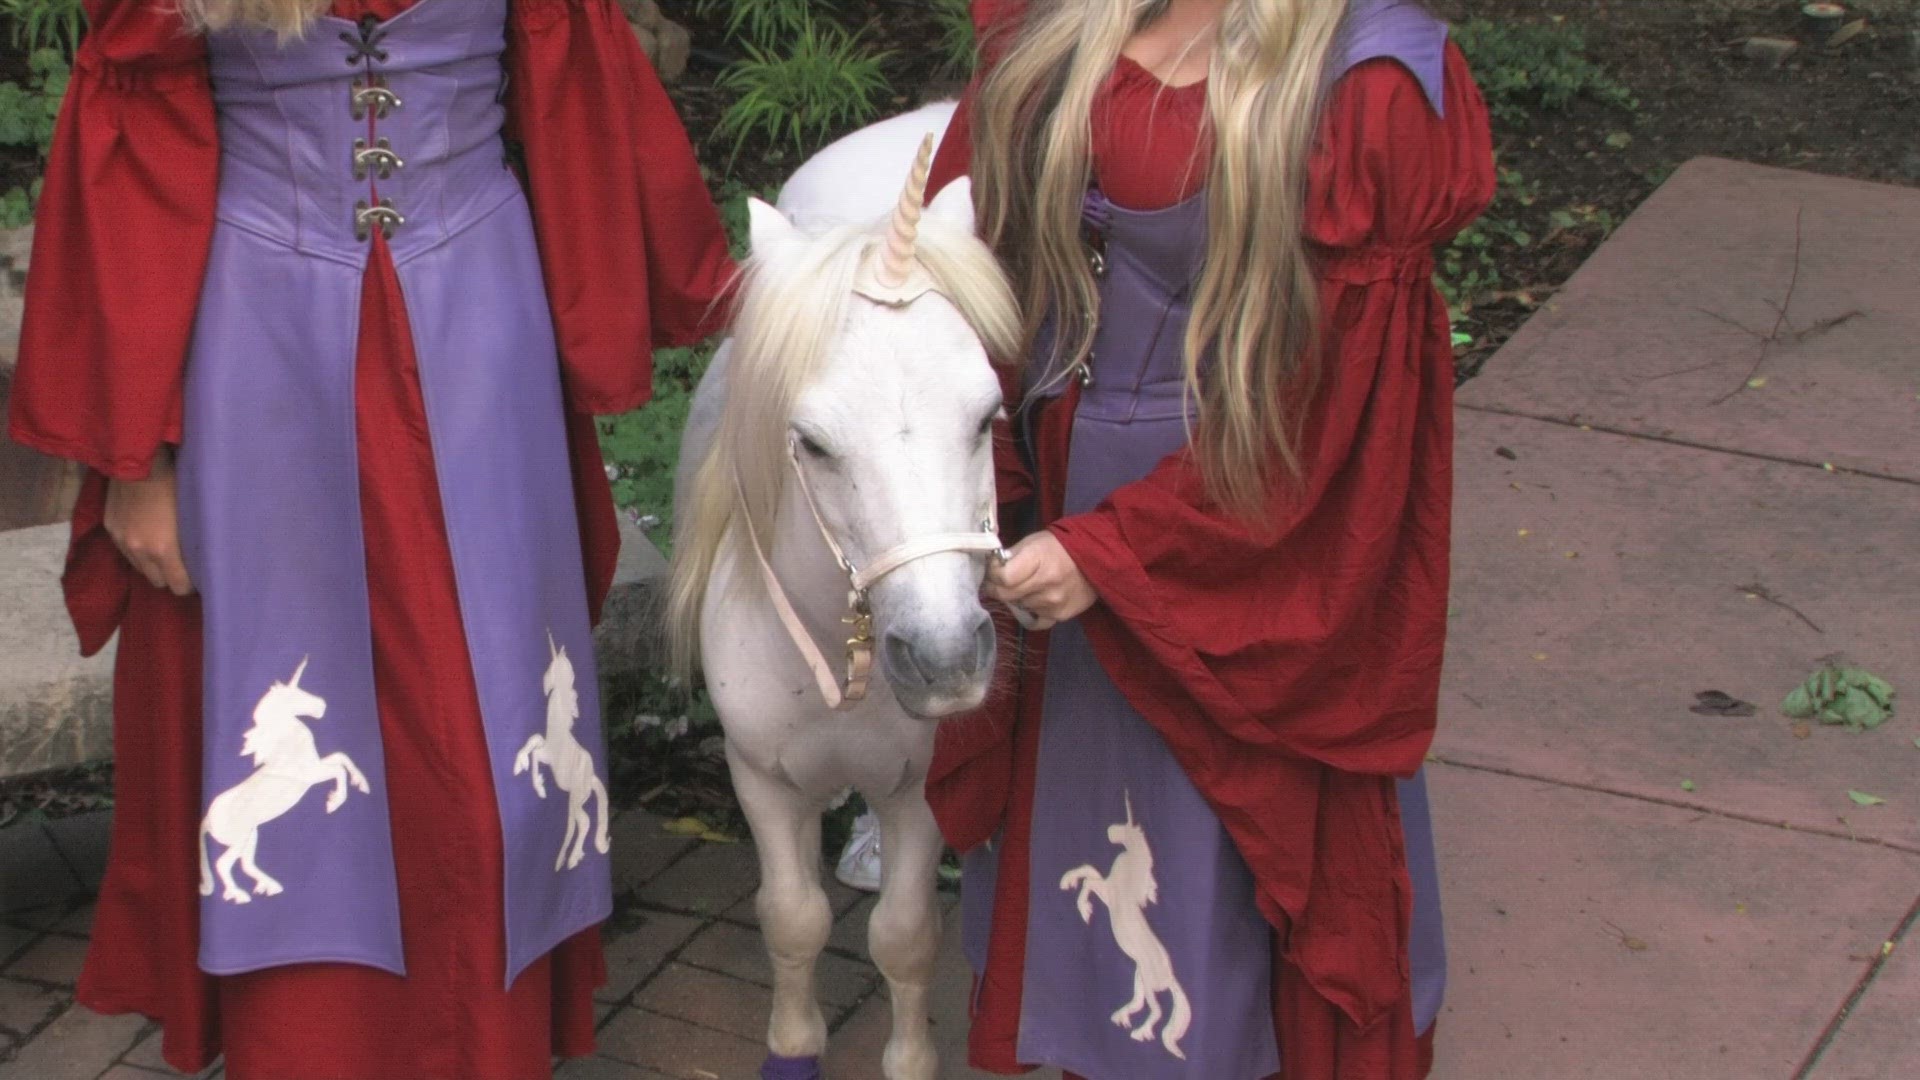 The Unicorn Festival is happening at Littleton's Clement Park June 10-11. There will be magical activities, cosplayers and anyone who loves imagination and fun!